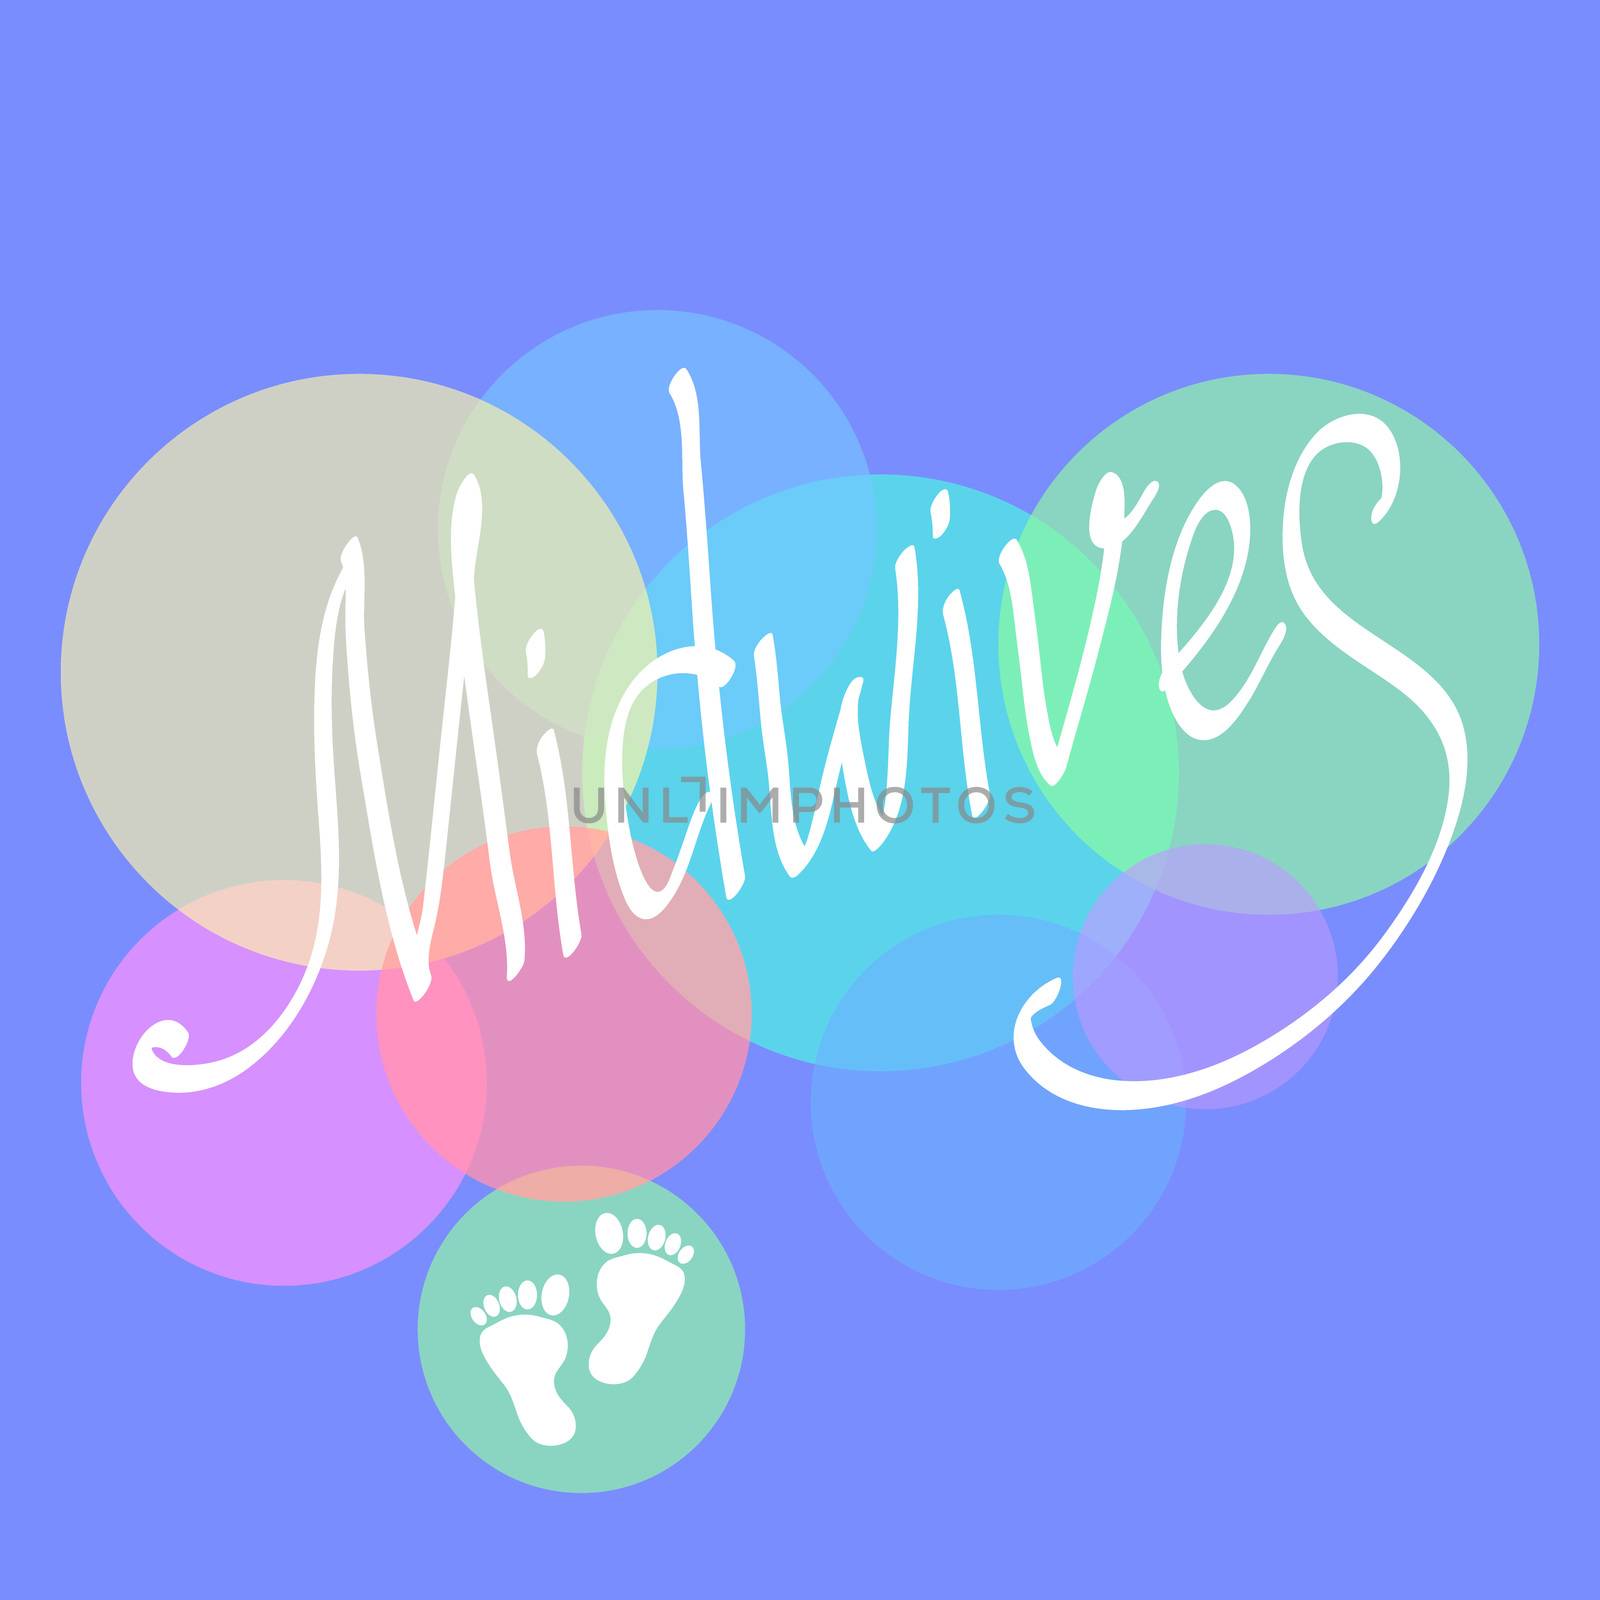 Midwives day 5 may. Vector illustration for International Midwives day greeting cards. by VeekSegal